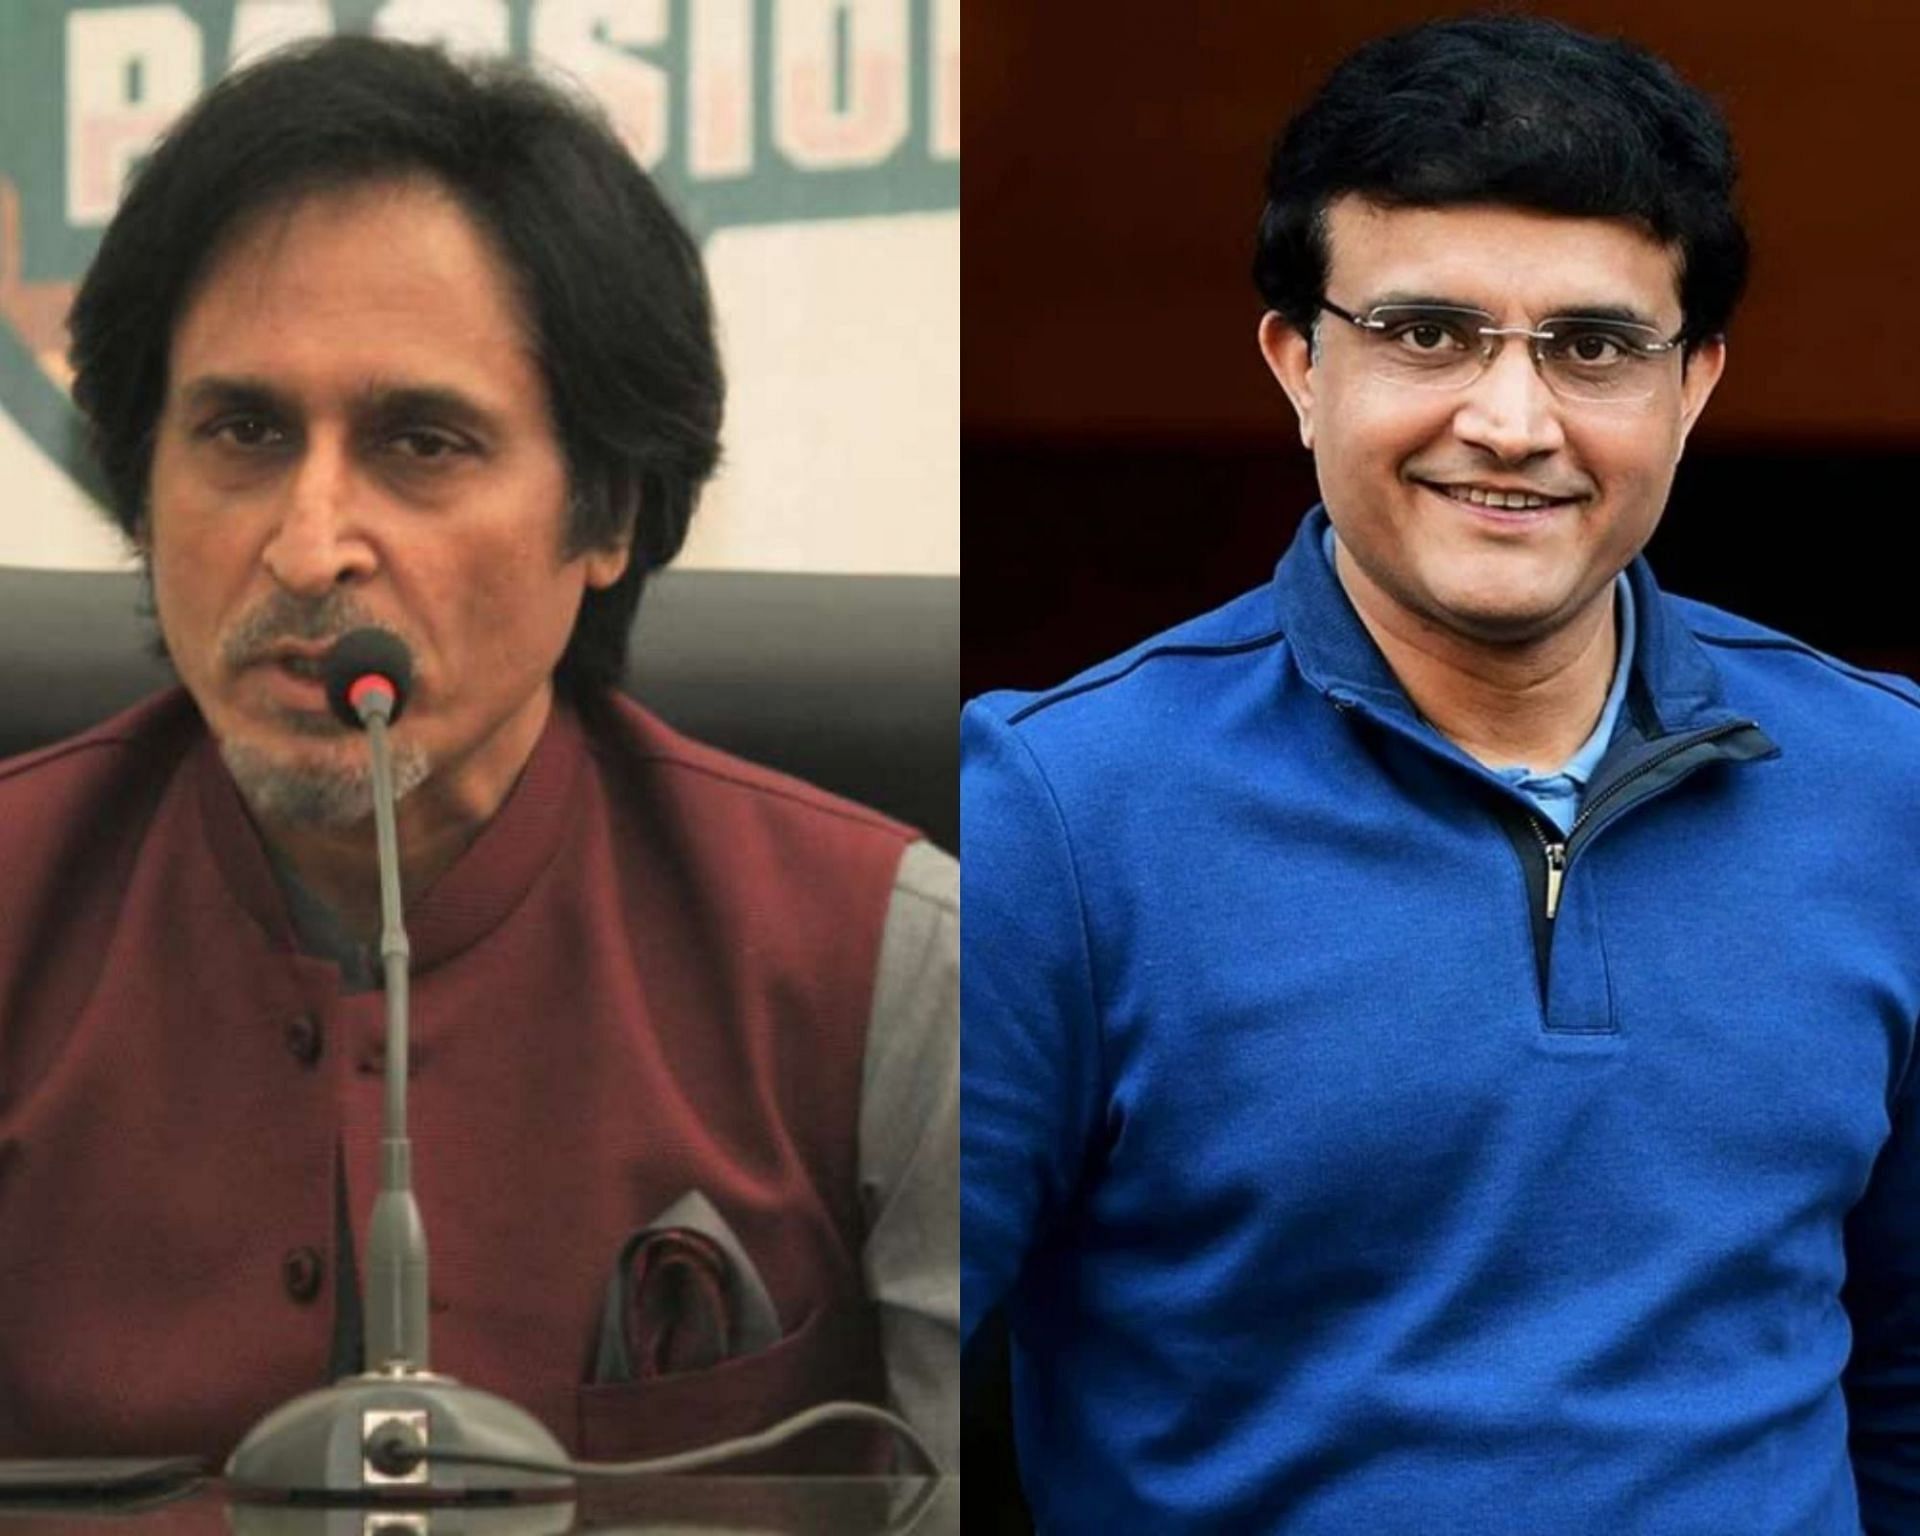 Ramiz Raja (L) confirmed that he met Sourav Ganguly and Jay Shah on the sidelines of ACC meeting.